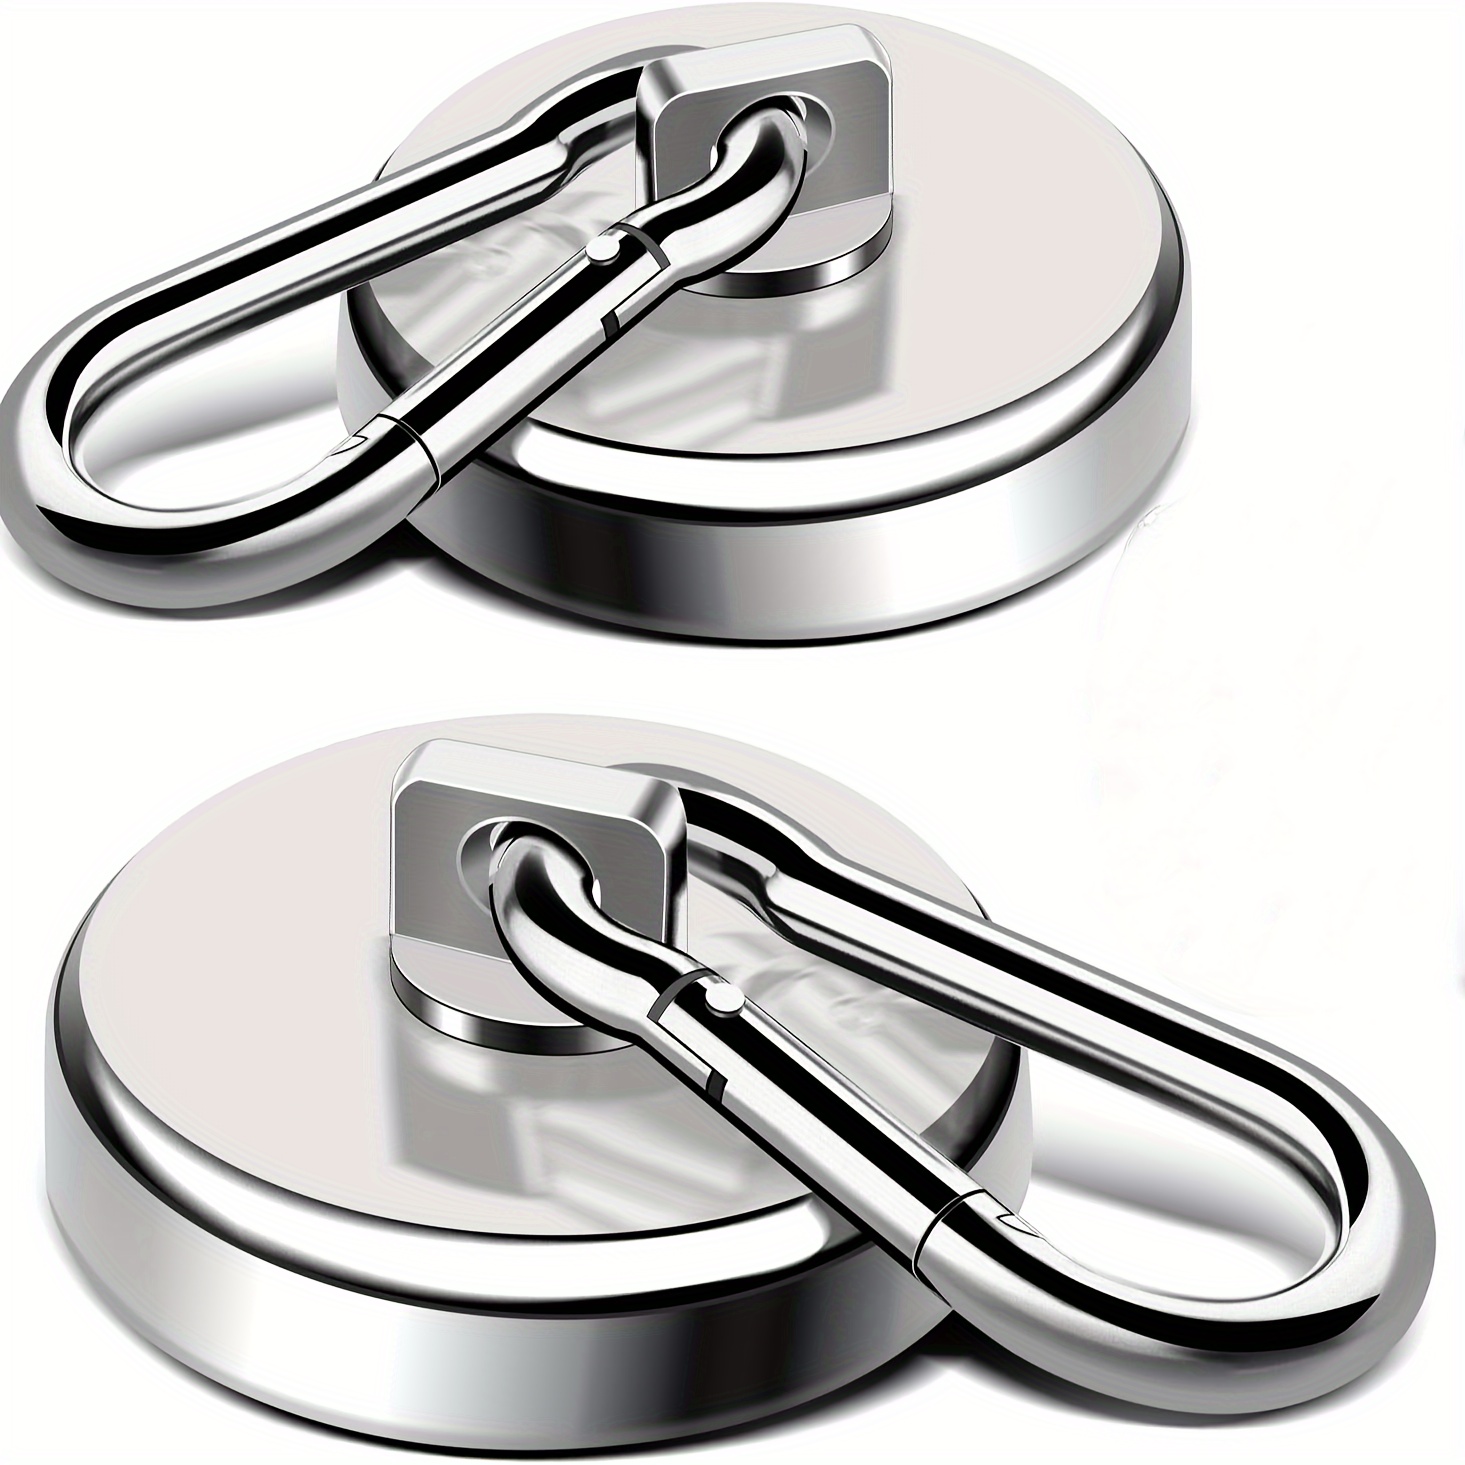 

1/2pcs Magnetic Hooks Heavy Duty, 100lbs Strong Magnetic Hooks Neodymium Magnets With Carabiner, Magnet Hooks With Swivel For Bbq, Hanging, Cruise, Kitchen, Garage, Refrigerator